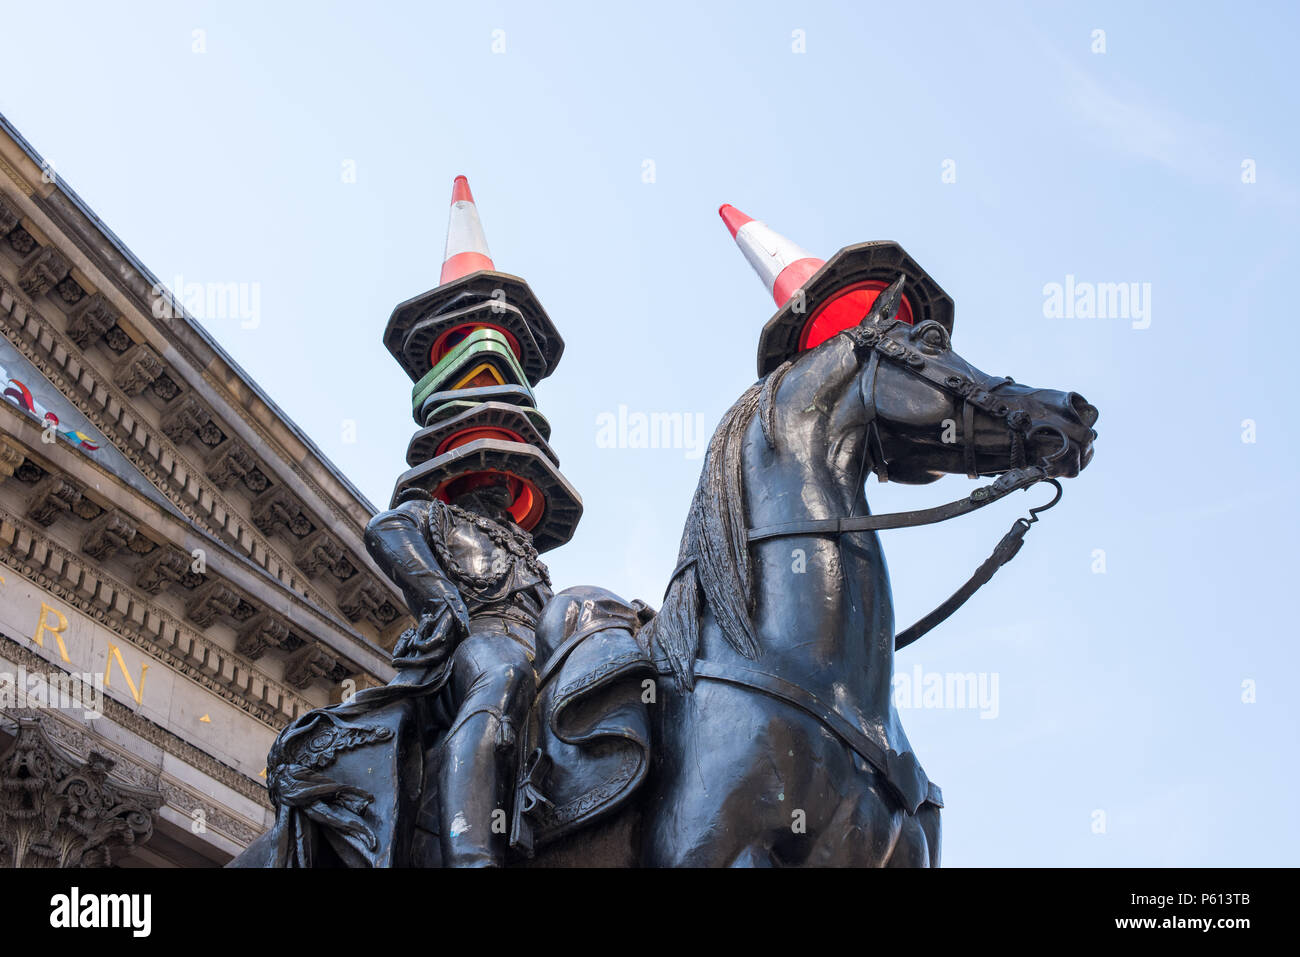 Glasgow, UK. 27th Jun, 2018. UK Weather: Quirky tourist attraction the Duke of Wellington statue gets extra cones on its head in the summer sunshine Credit: Tony Clerkson/Alamy Live News Stock Photo